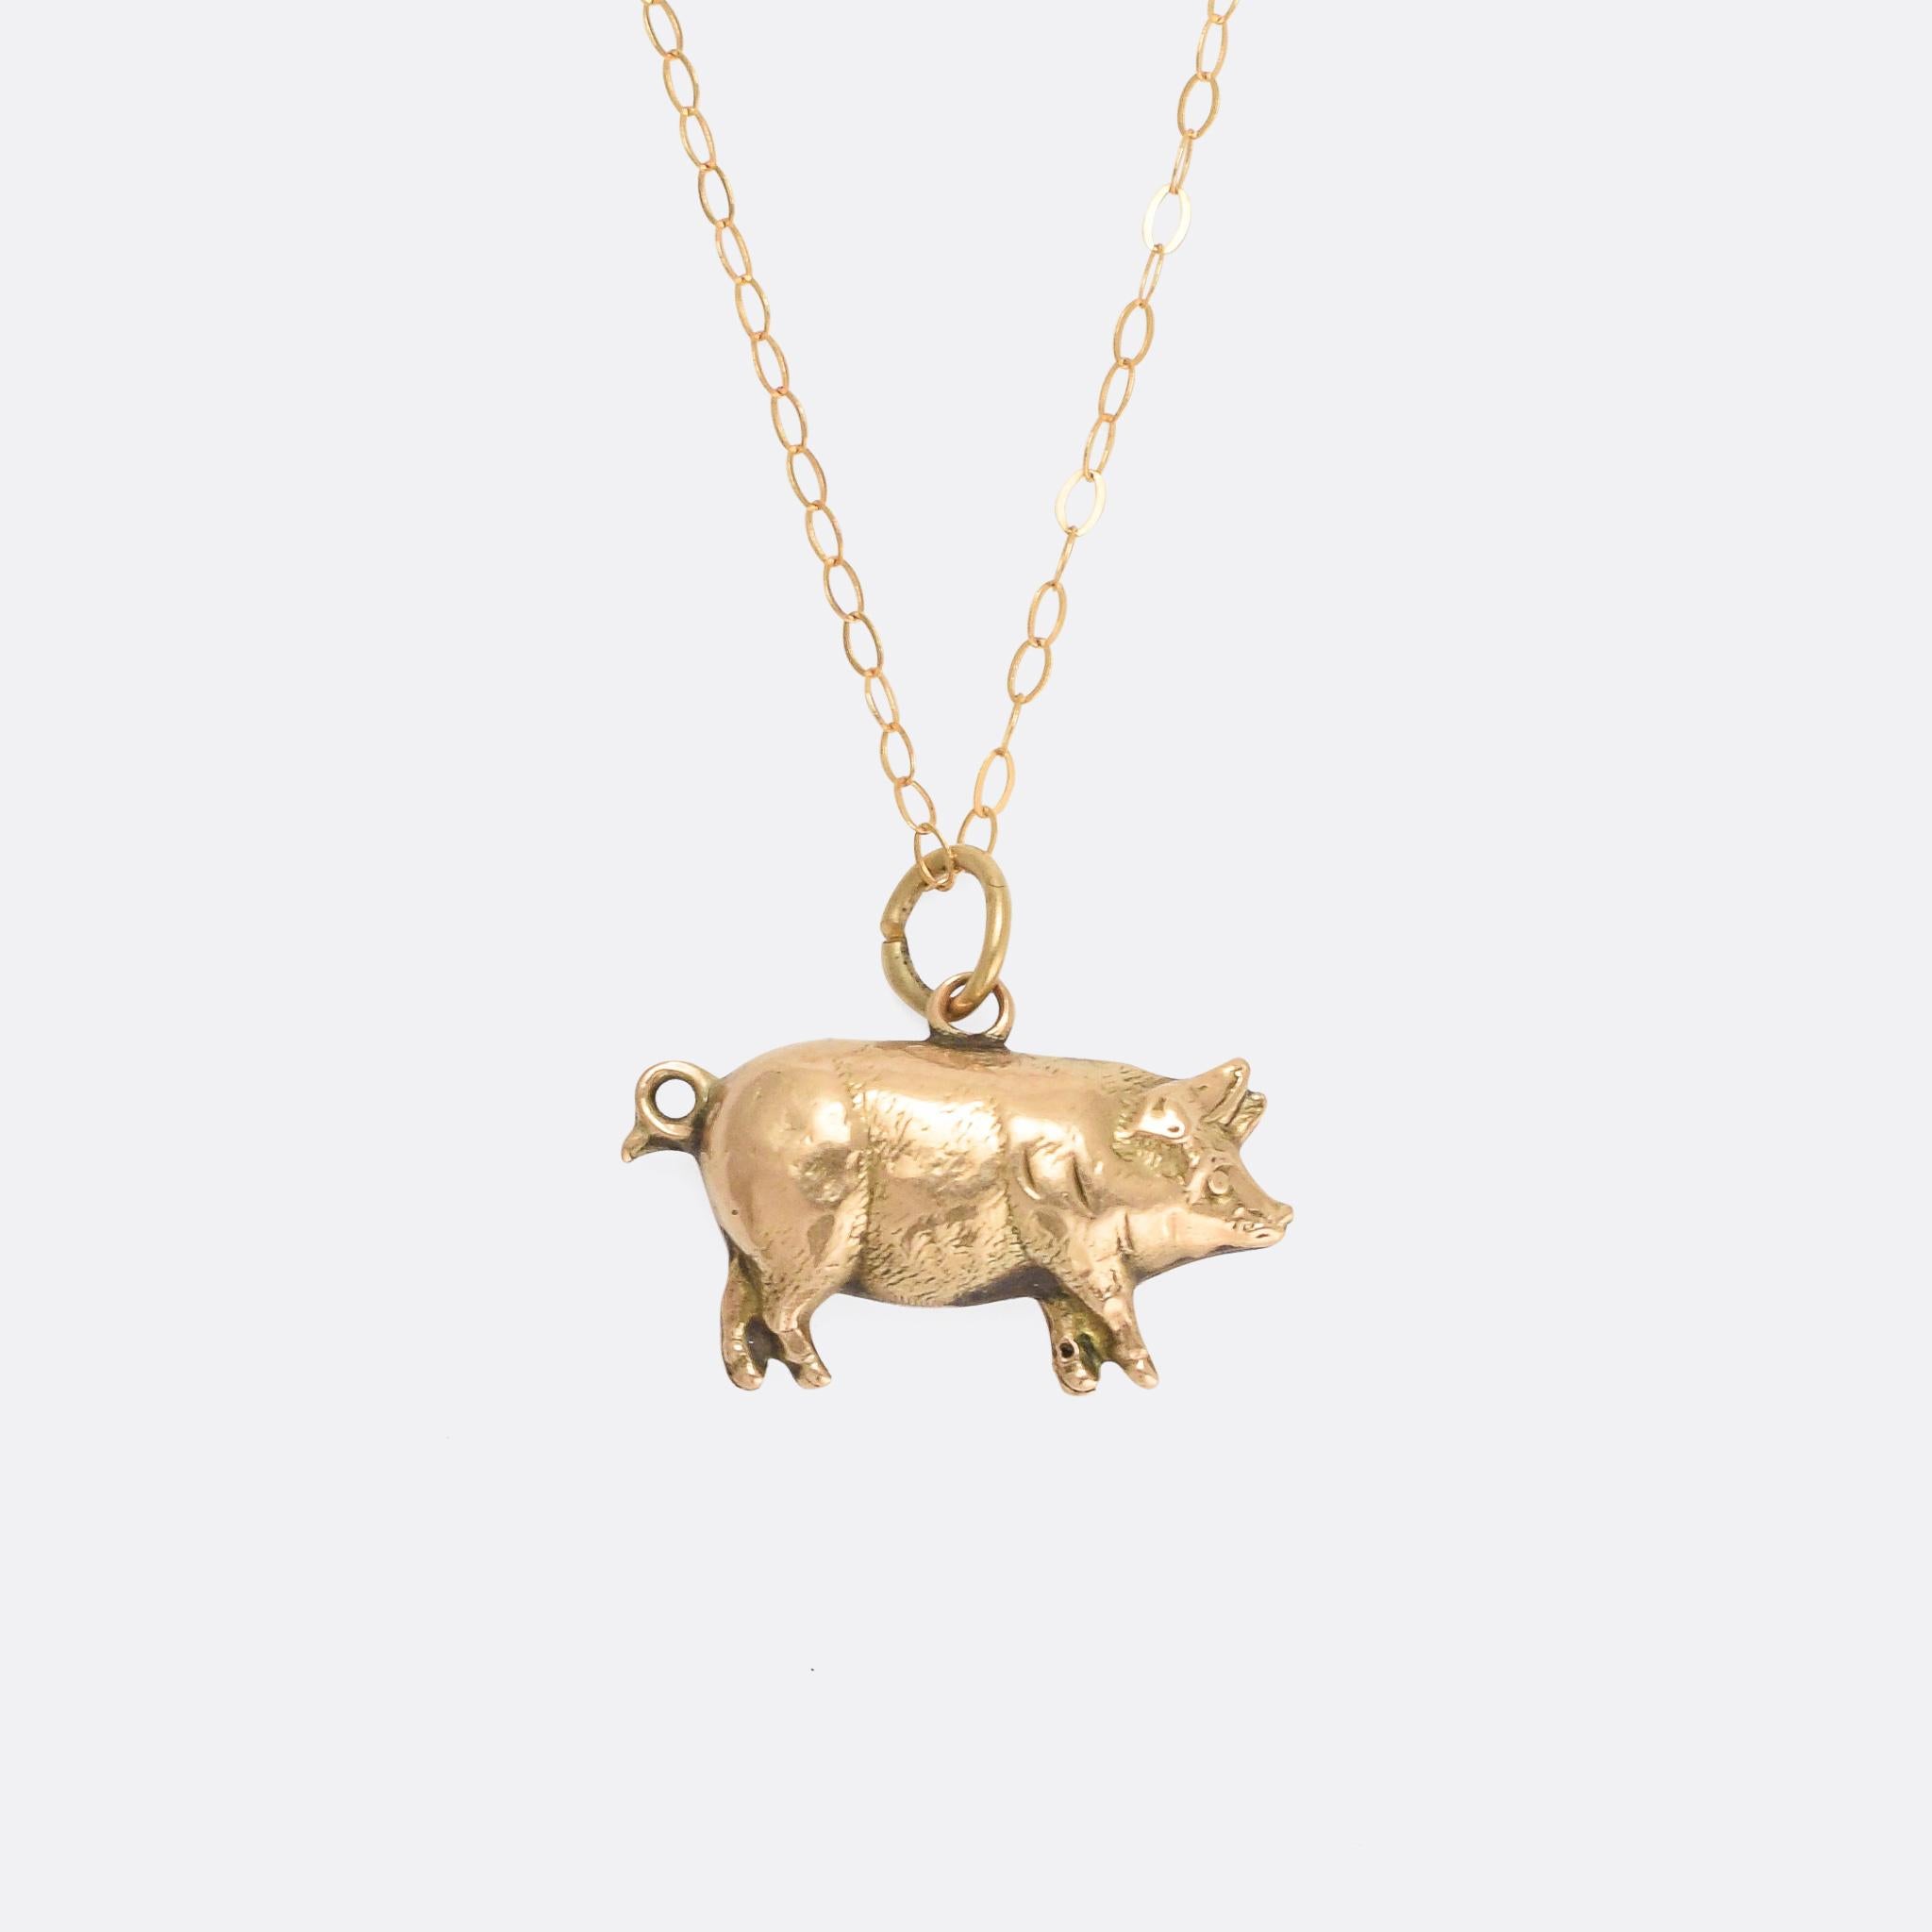 A cute antique lucky pig charm pendant in 9 karat gold. It dates from the very end of the 19th Century, with clear English hallmarks dating from the year 1898.

MEASUREMENTS 
18.8 x 11.7mm

WEIGHT 
0.8g

MARKS 
English hallmarks for 9k gold,